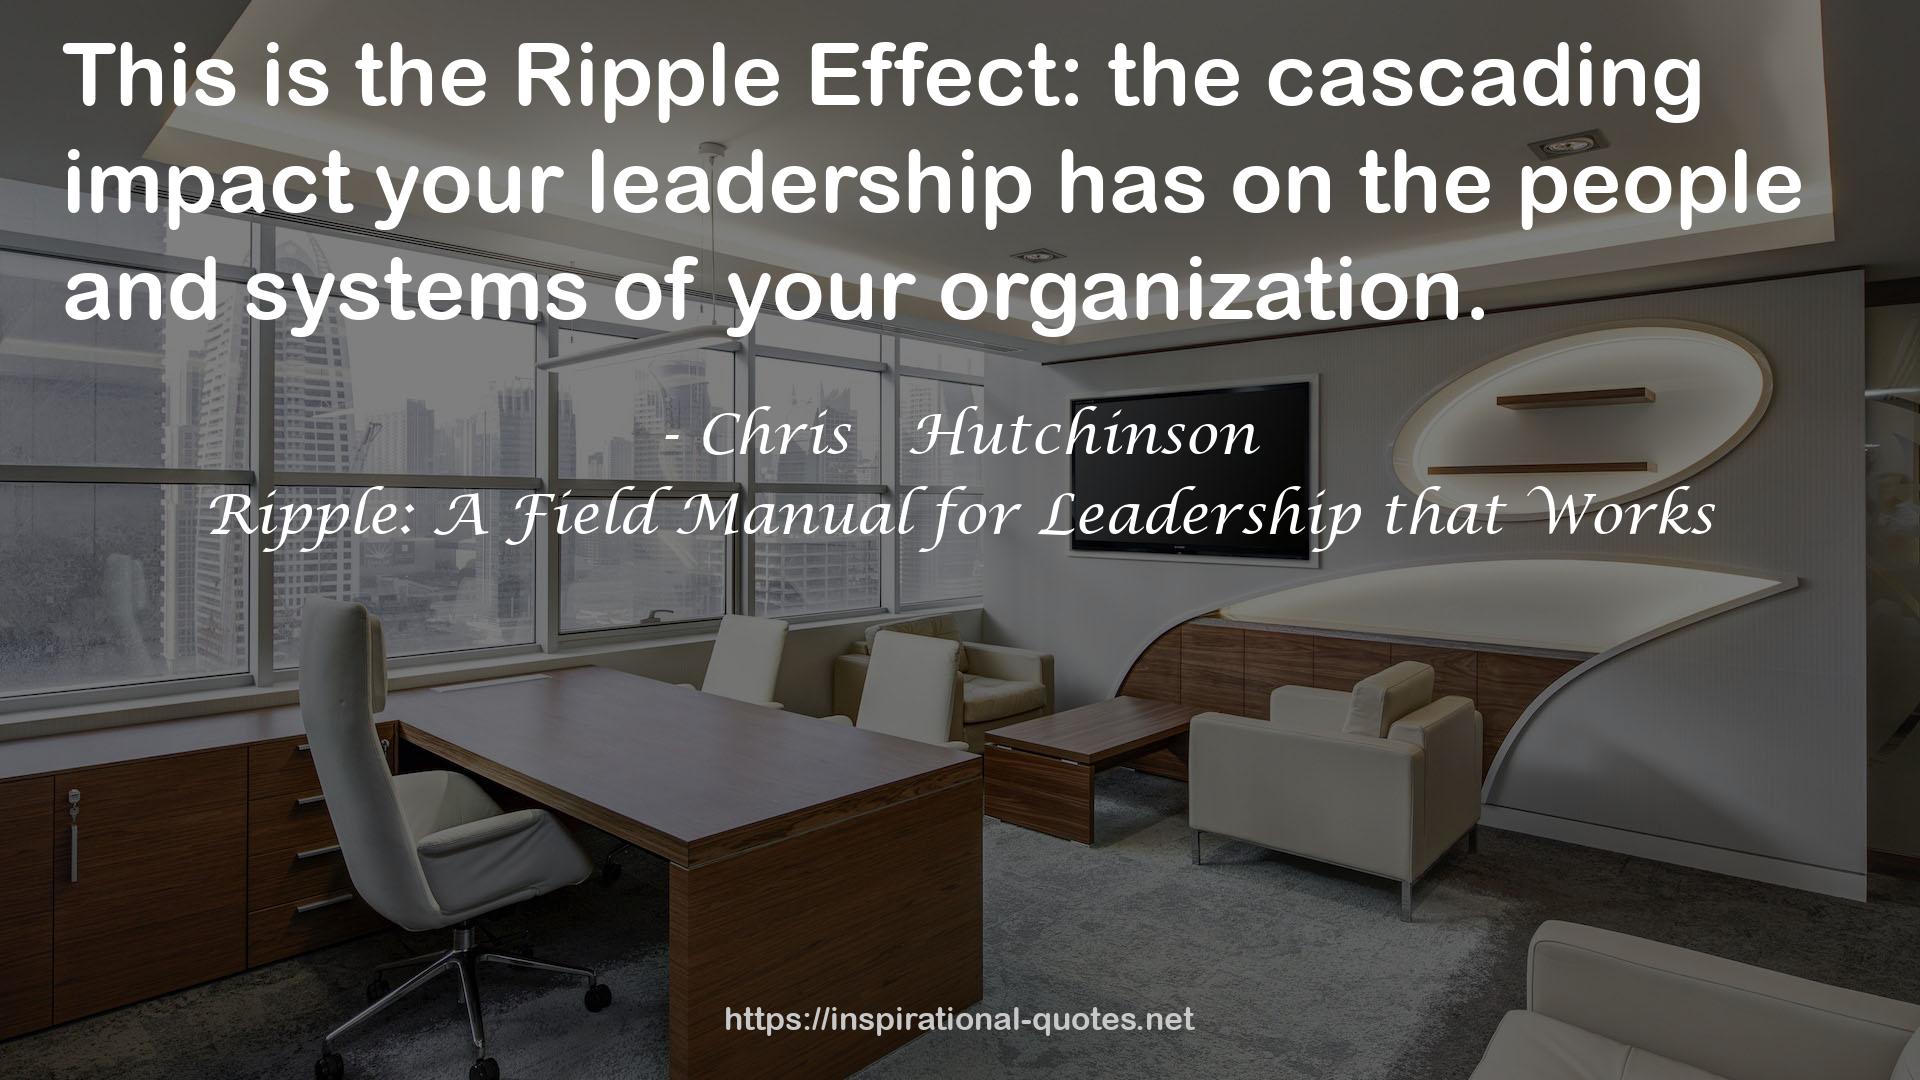 Ripple: A Field Manual for Leadership that Works QUOTES